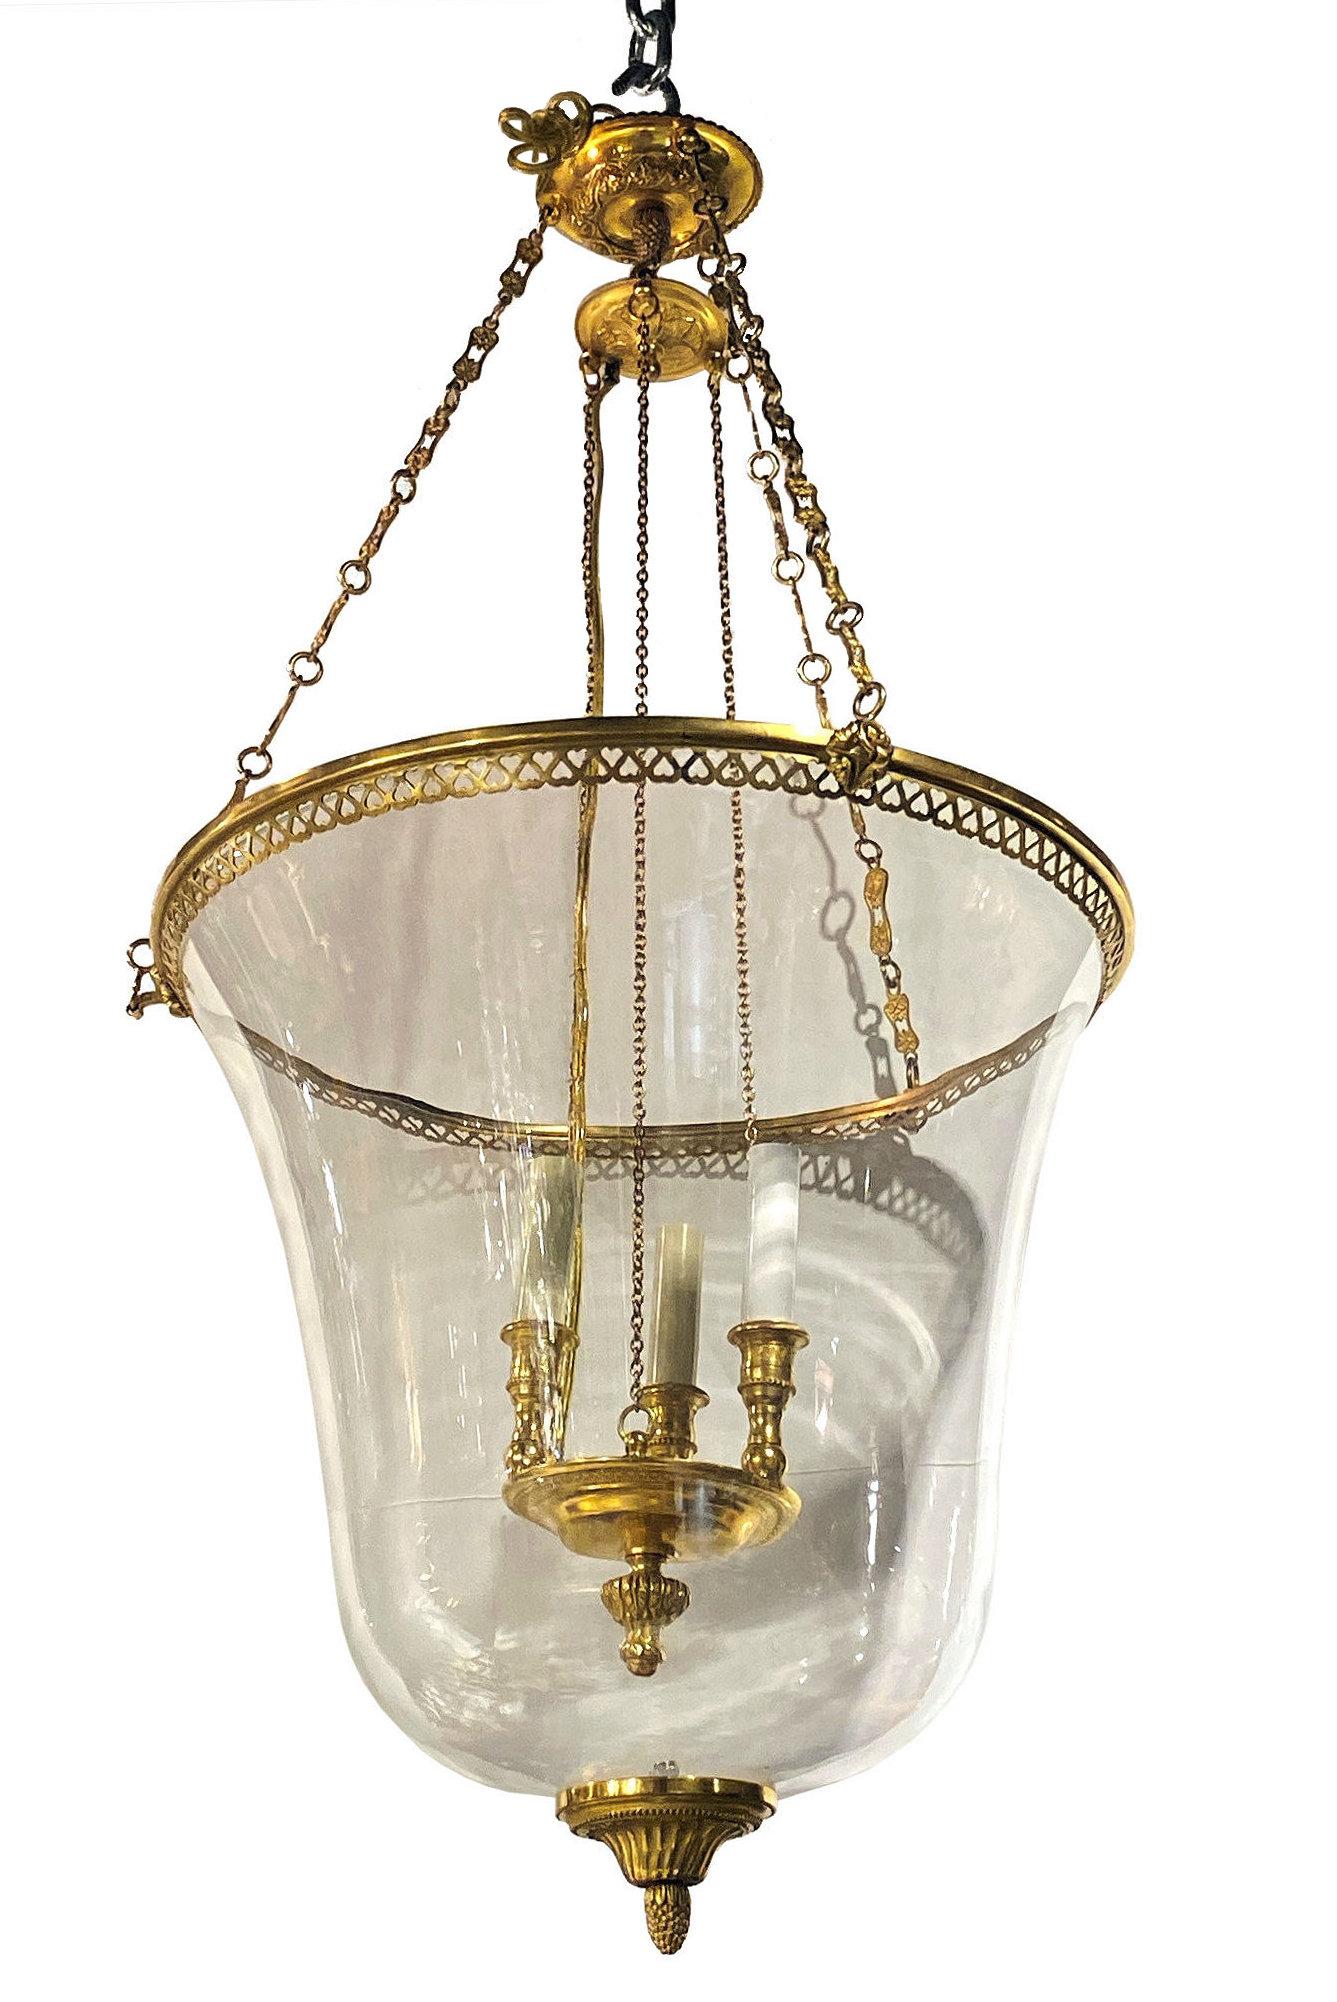 Pair of French Louis XVI style gilt bronze and glass fish bowl lanterns.